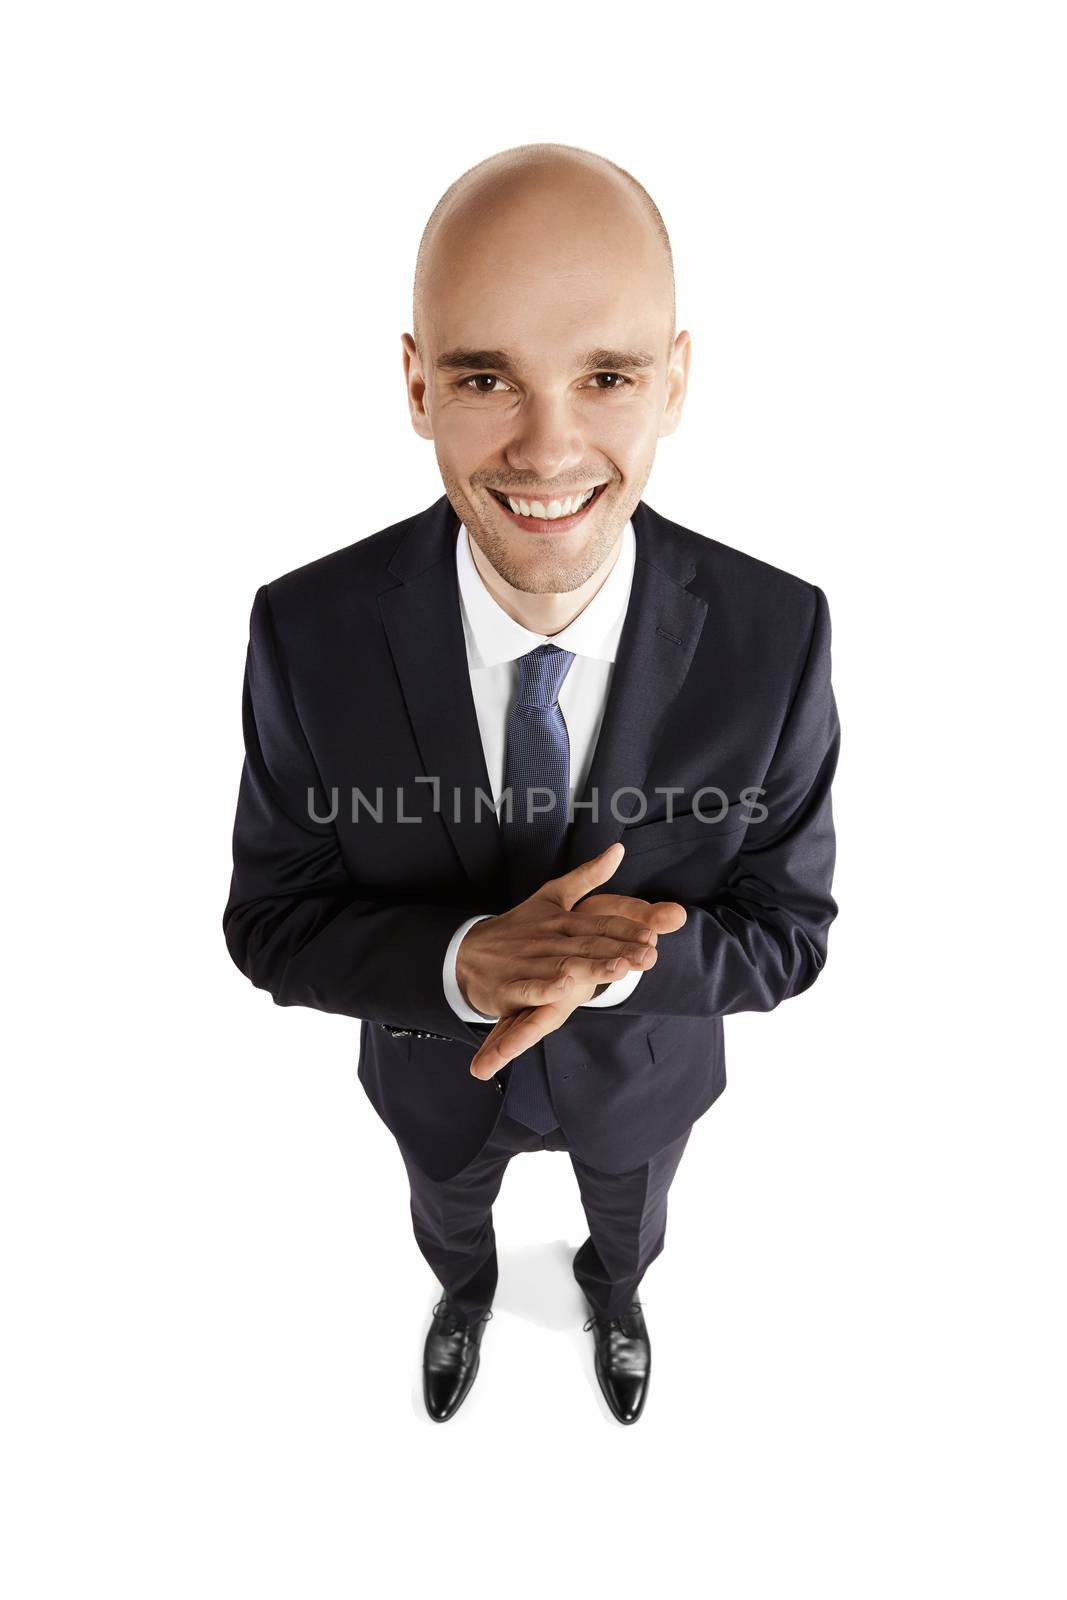 Overhead view of a satisfied man. Portrait isolated on white background.